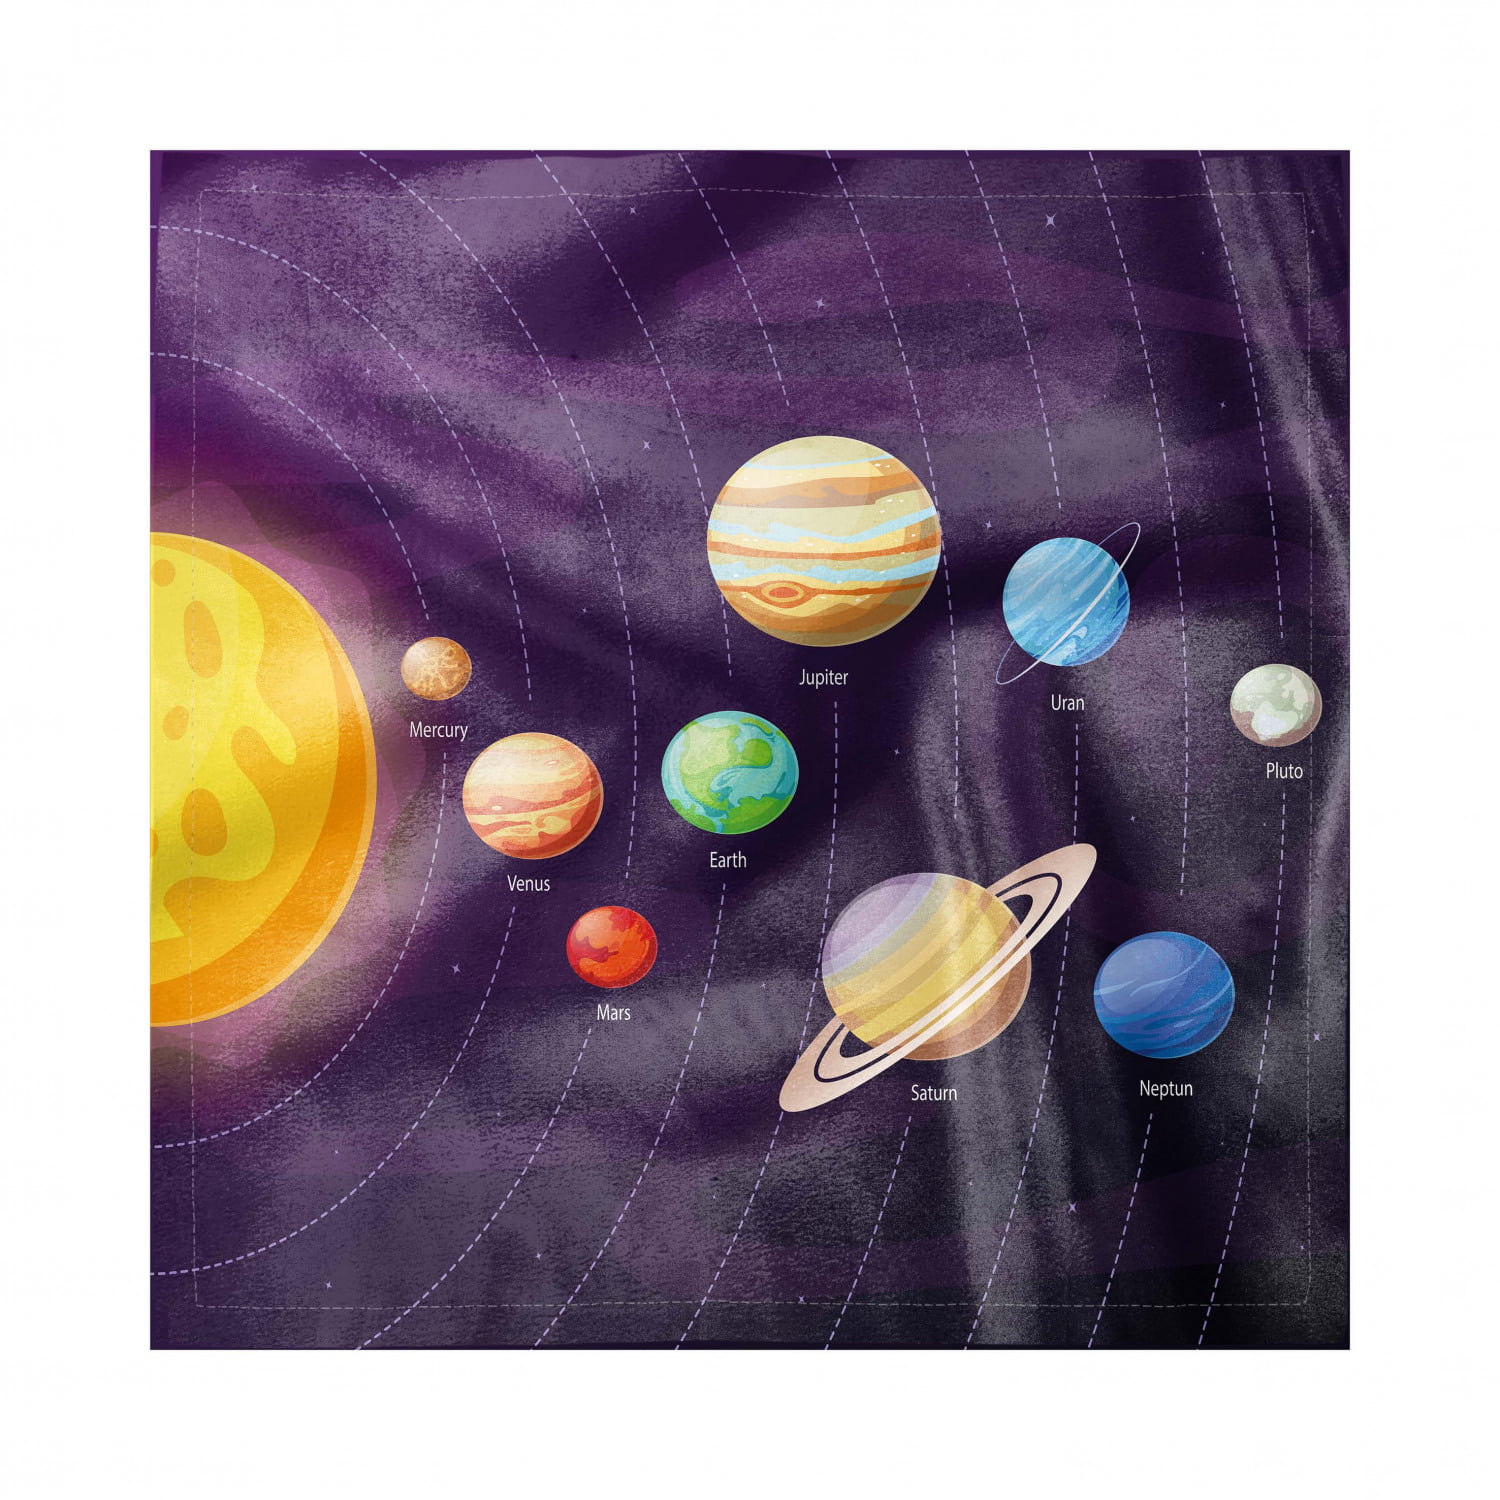 Rectangular Table Cover for Dining Room Kitchen Decor 60 X 90 Multicolor Pastel Colored Galactic Planets Cartoon Stars Milky Way Astronomy on Polka Dots Ambesonne Space Tablecloth